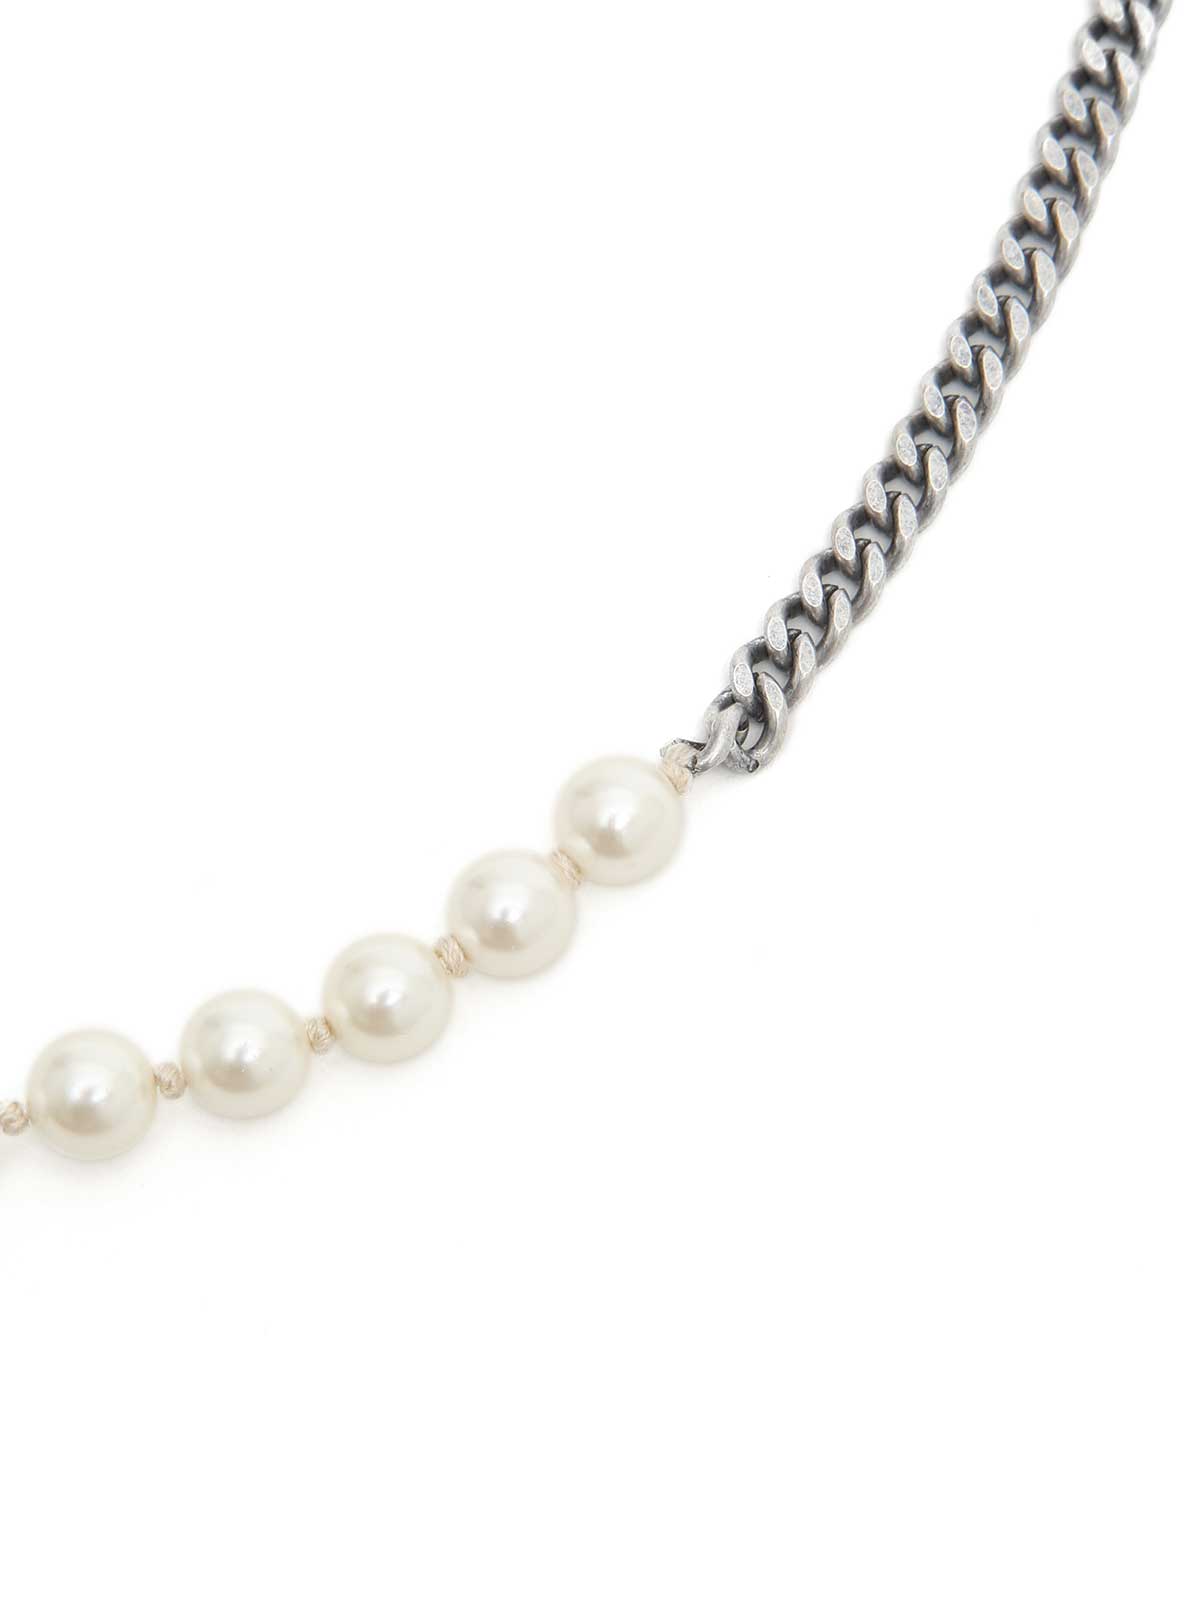 Pearls and Chain Necklace